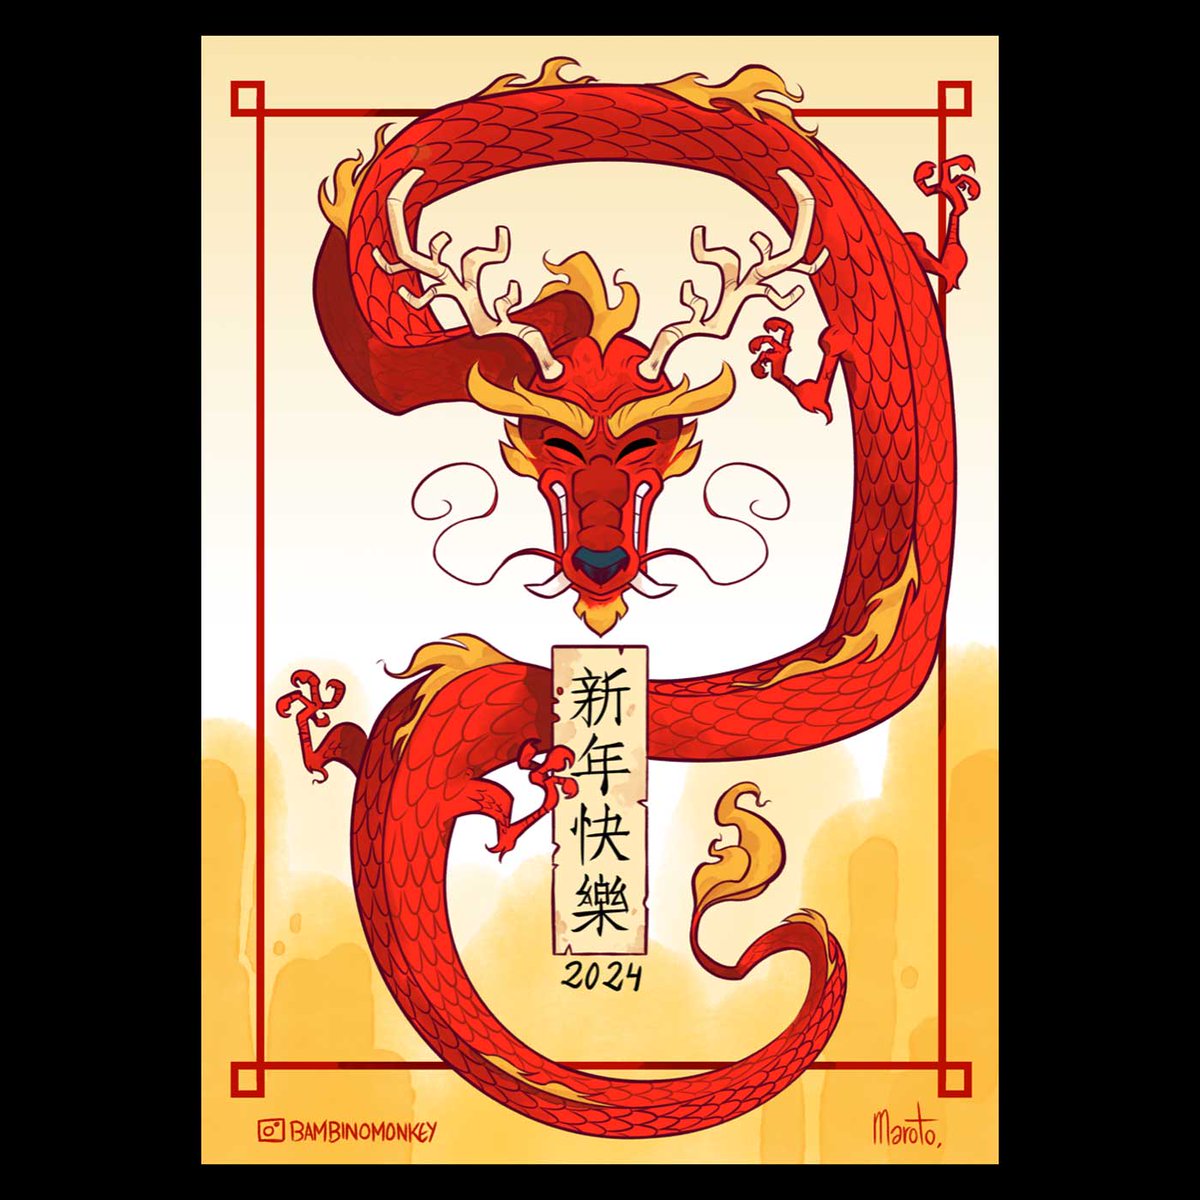 In celebration of the Year of The Dragon we wanted to share this illustration by our friend #Maroto @bambinomonkey created in the @xencelabs #pendisplay24. No better way to celebrate the strongest & luckiest of the Chinese Zodiac signs than with beautiful art.
#createwhatyoudream